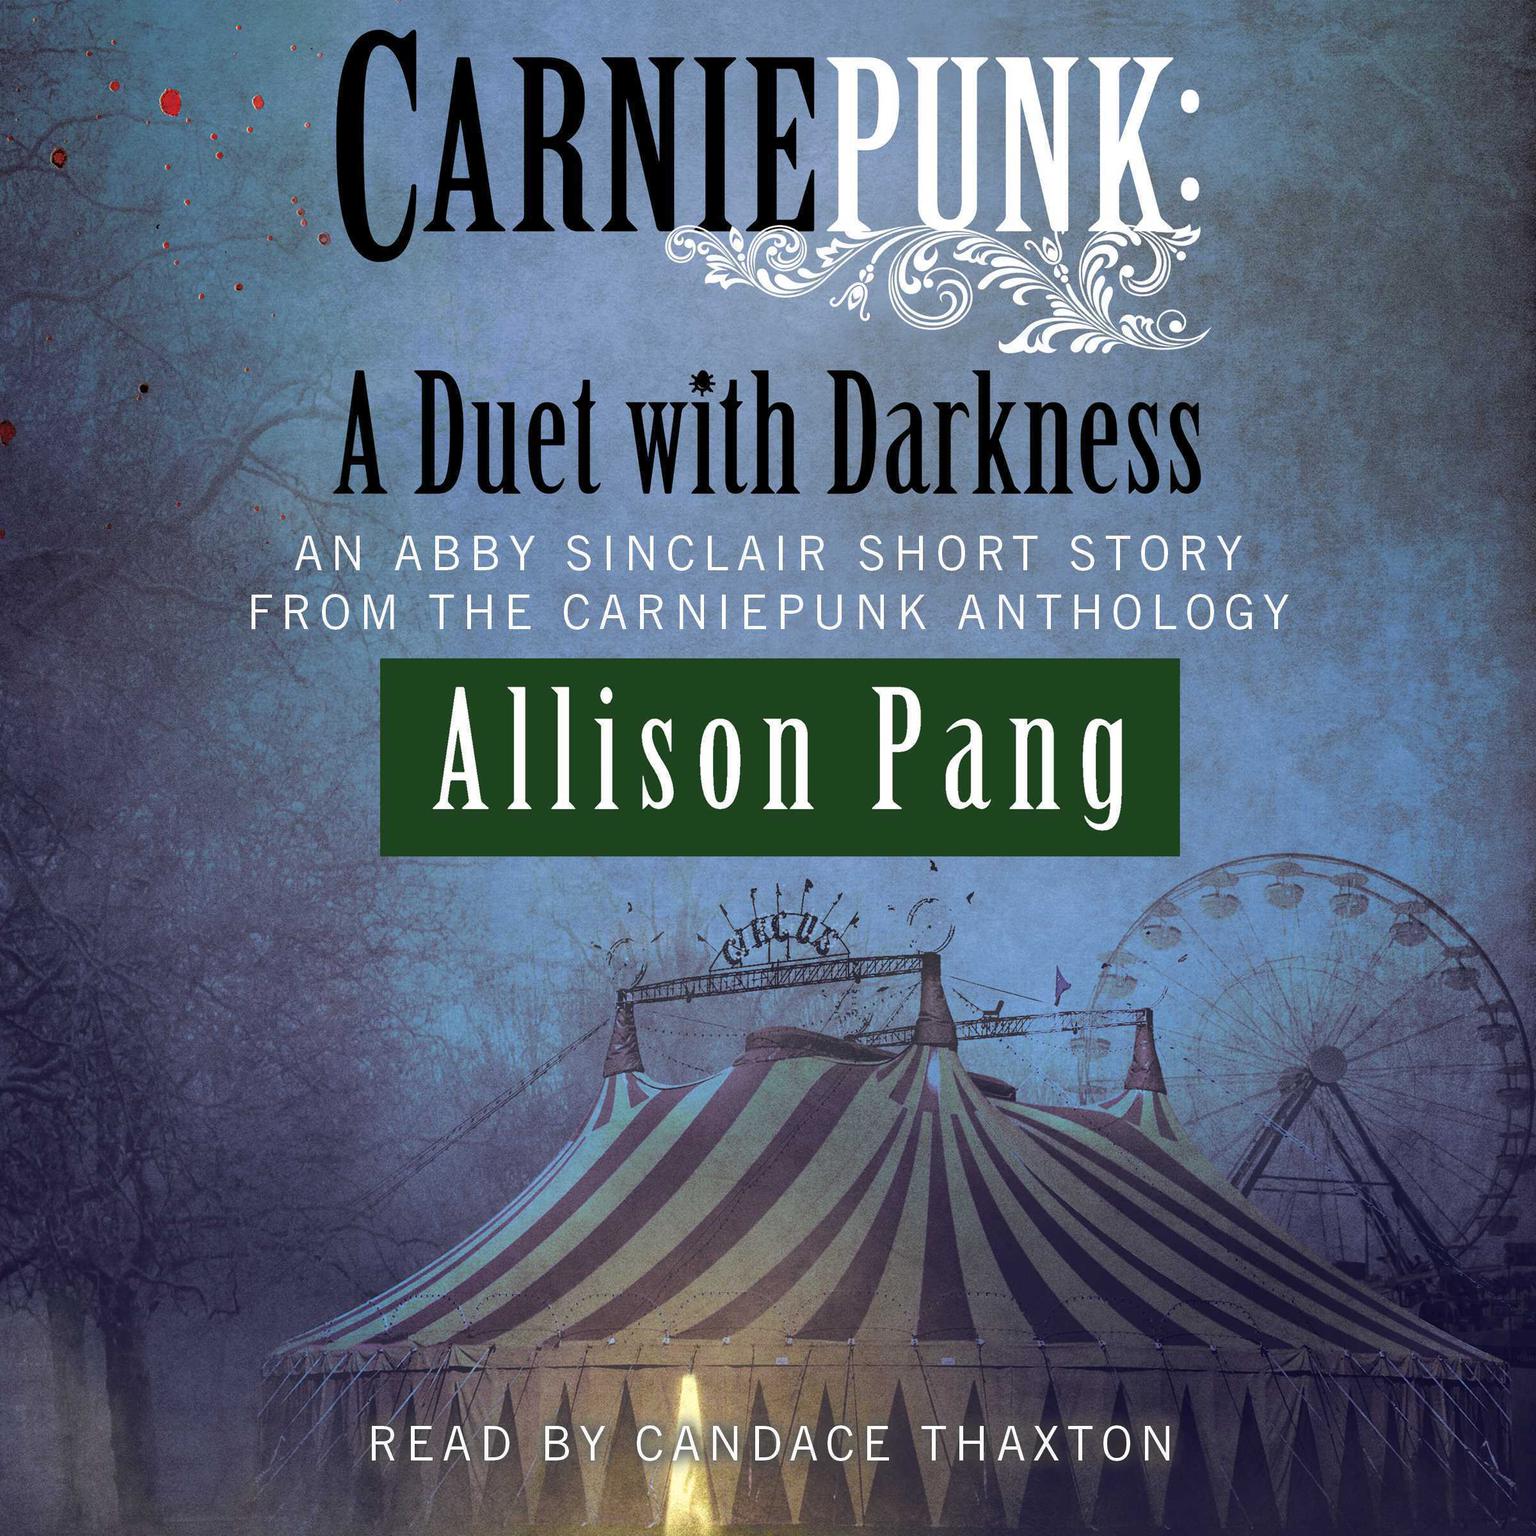 Carniepunk: A Duet with Darkness Audiobook, by Allison Pang